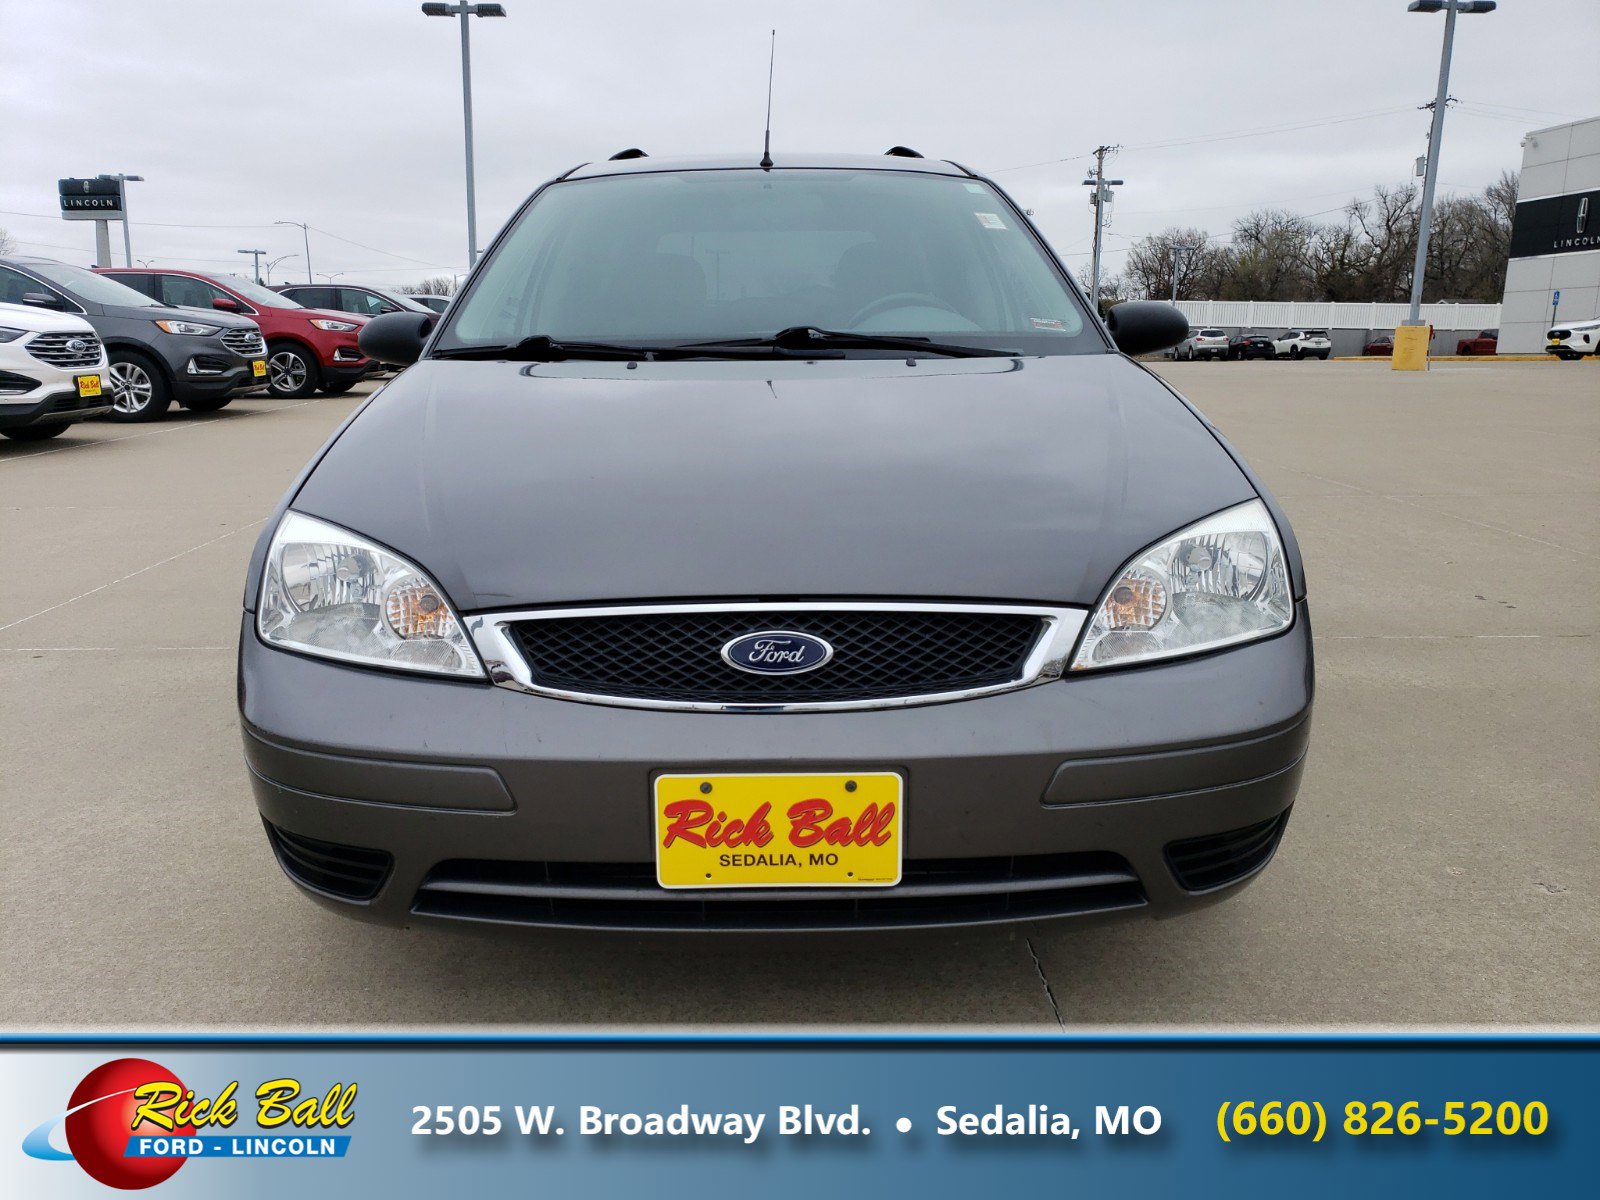 Used 2005 Ford Focus ZXW SE with VIN 1FAFP36N25W135713 for sale in Kansas City